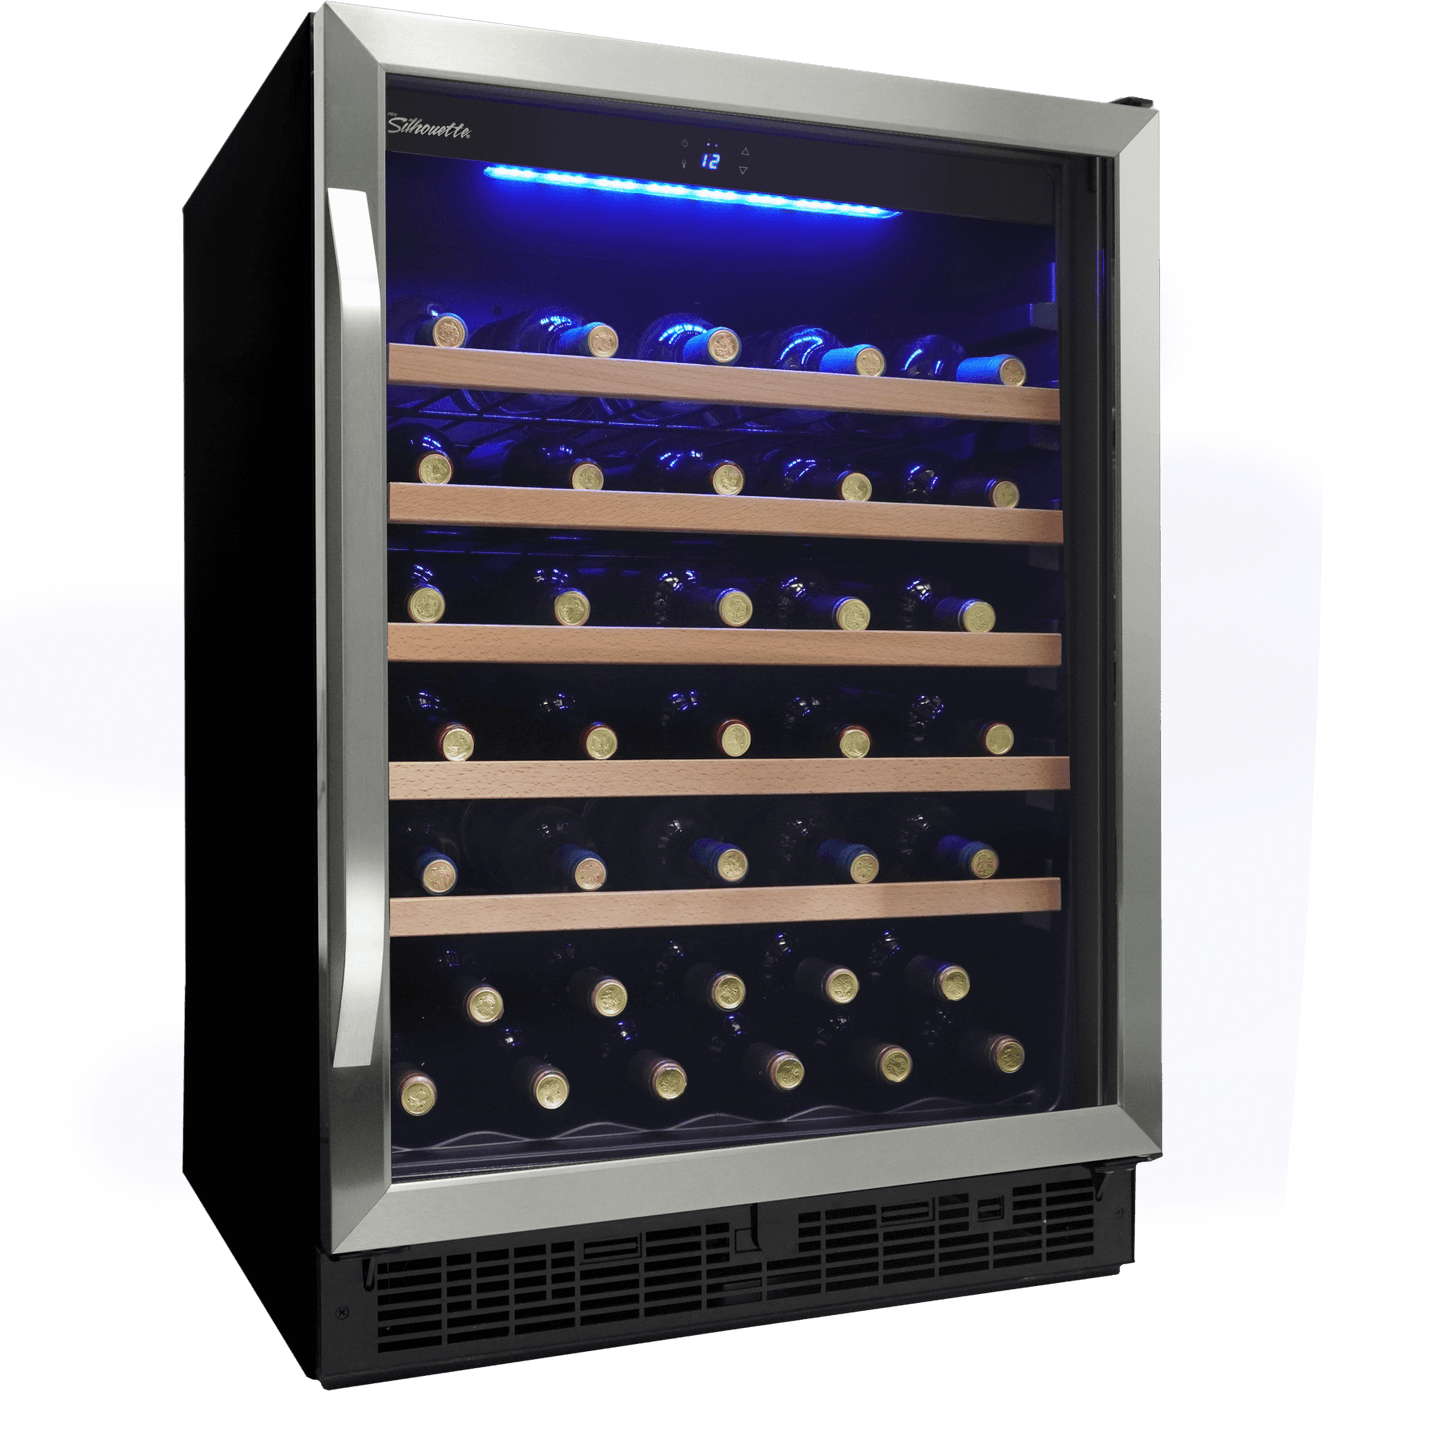 Silhouette Under Counter Wine Refrigeration - SWC057D1BSS Open Box